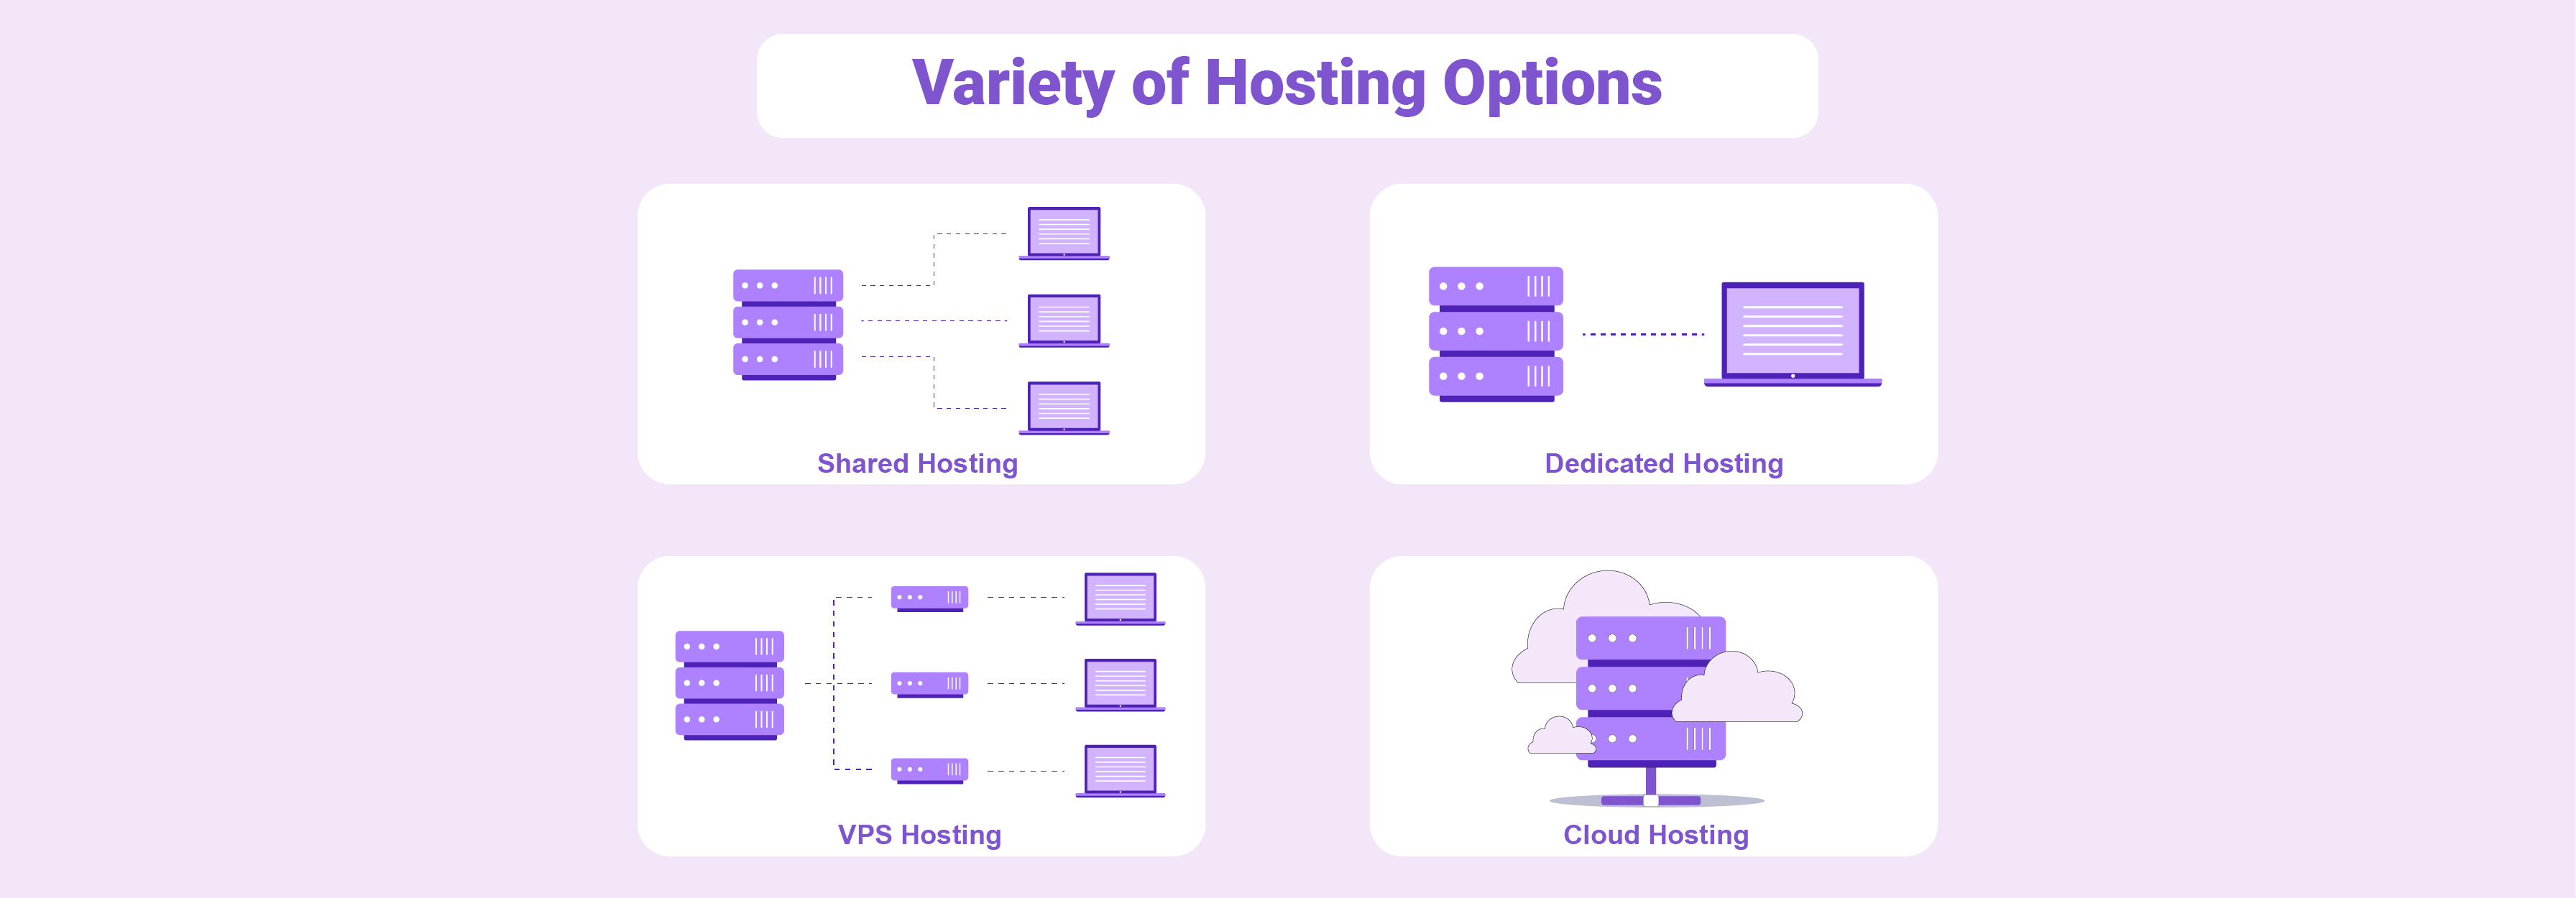 Different Magento hosting options available for businesses